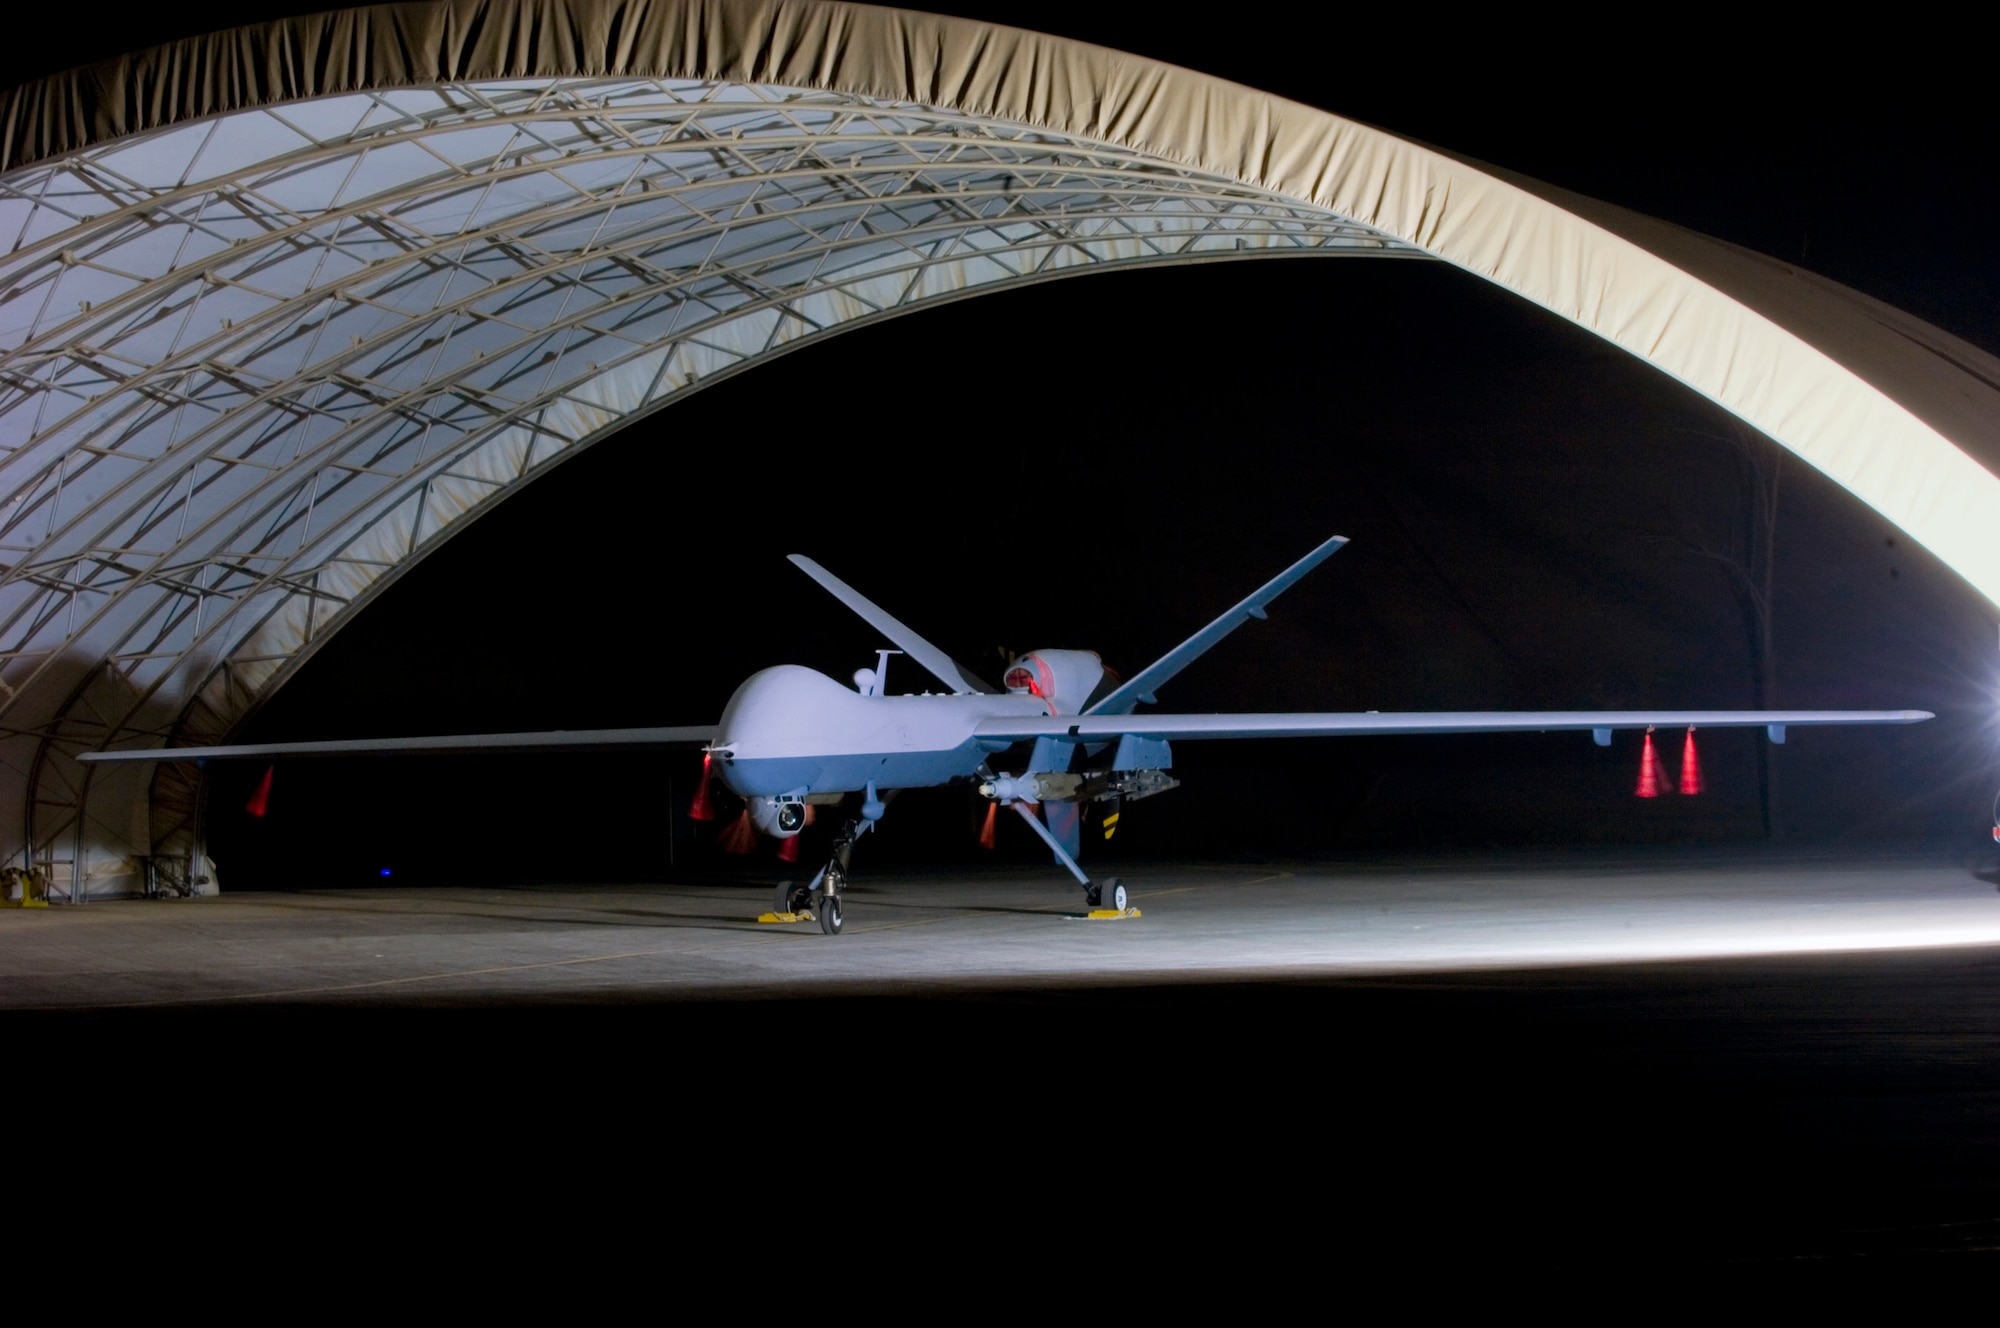 An armed MQ-9 Reaper unmanned aircraft sits in a shelter at Joint Base Balad, Iraq, before a mission. Larger and more powerful than the MQ-1 Predator, the Reaper can carry up to 3,750 pounds of laser-guided bombs and Hellfire missiles. (U.S. Air Force photo/Tech. Sgt. Erik Gudmundson) 
